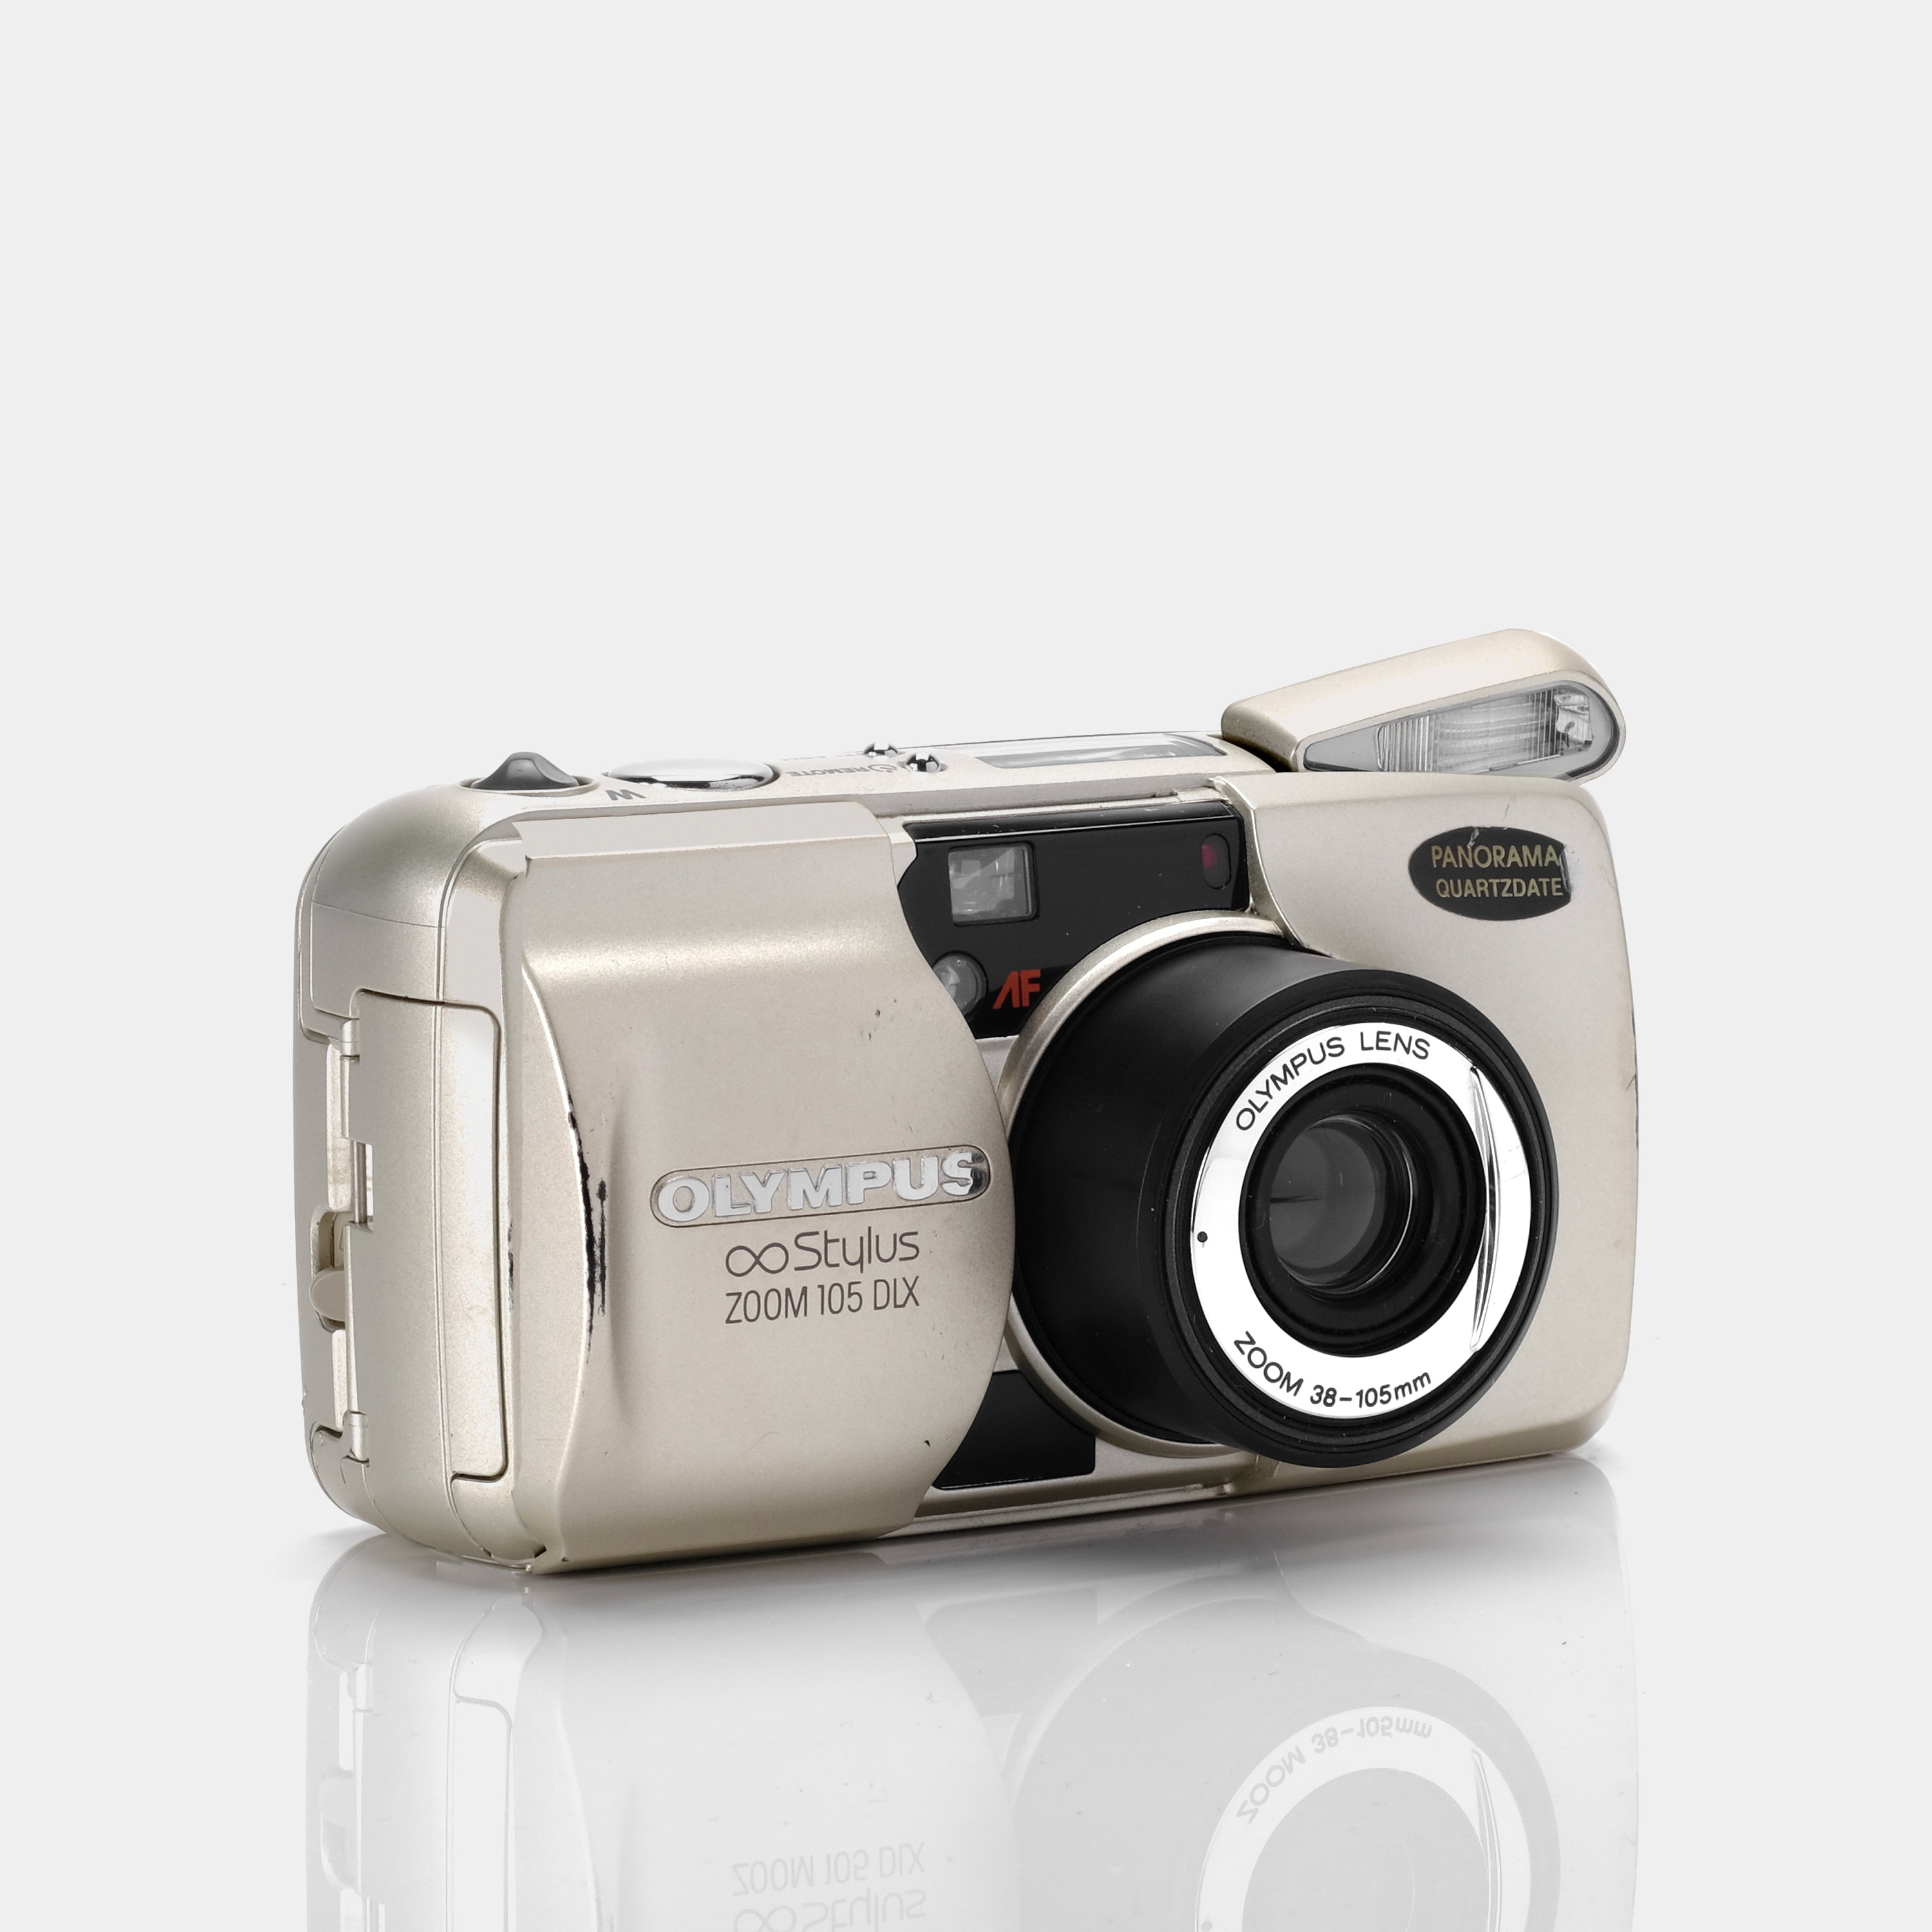 Olympus ∞ Infinity Stylus Zoom 105 DLX 35mm Point and Shoot Film Camera